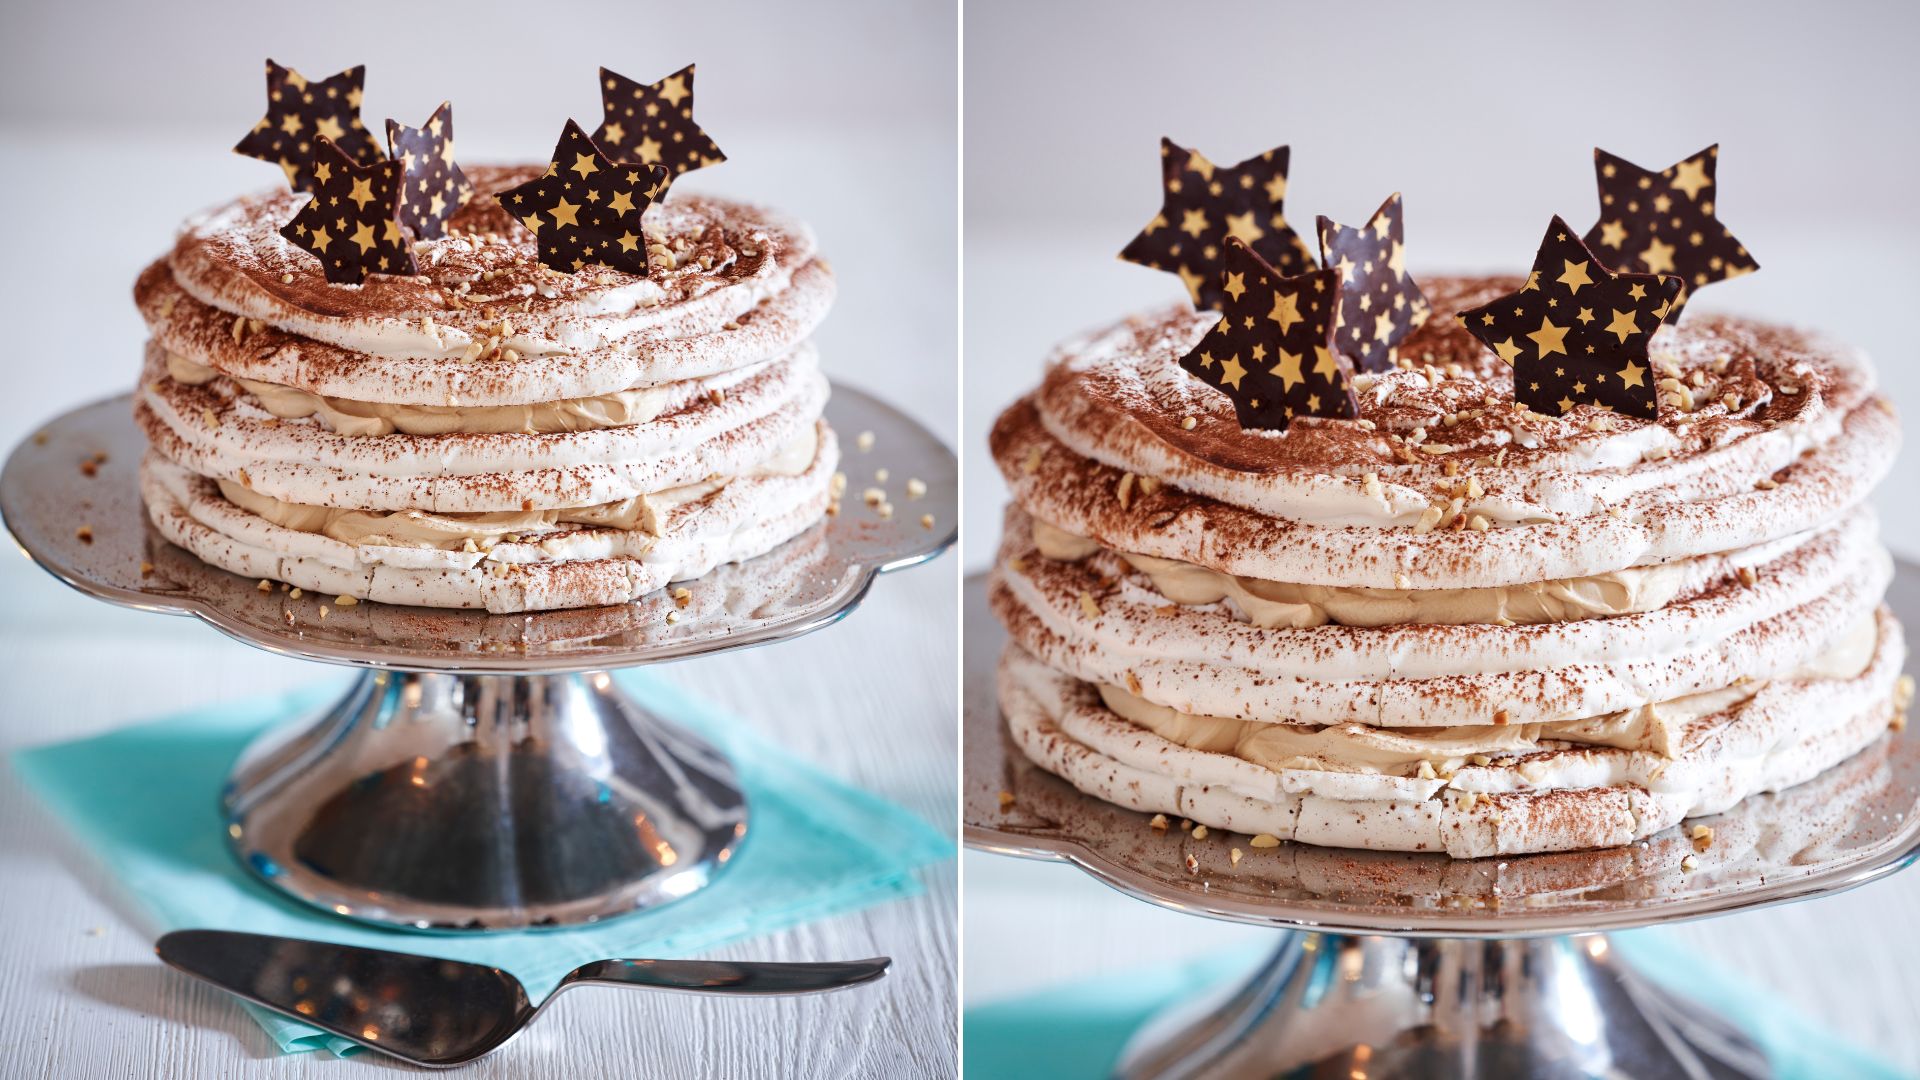 Hazelnut meringue and boozy Baileys whipped cream piled up on a cake stand with chocolate stars on top